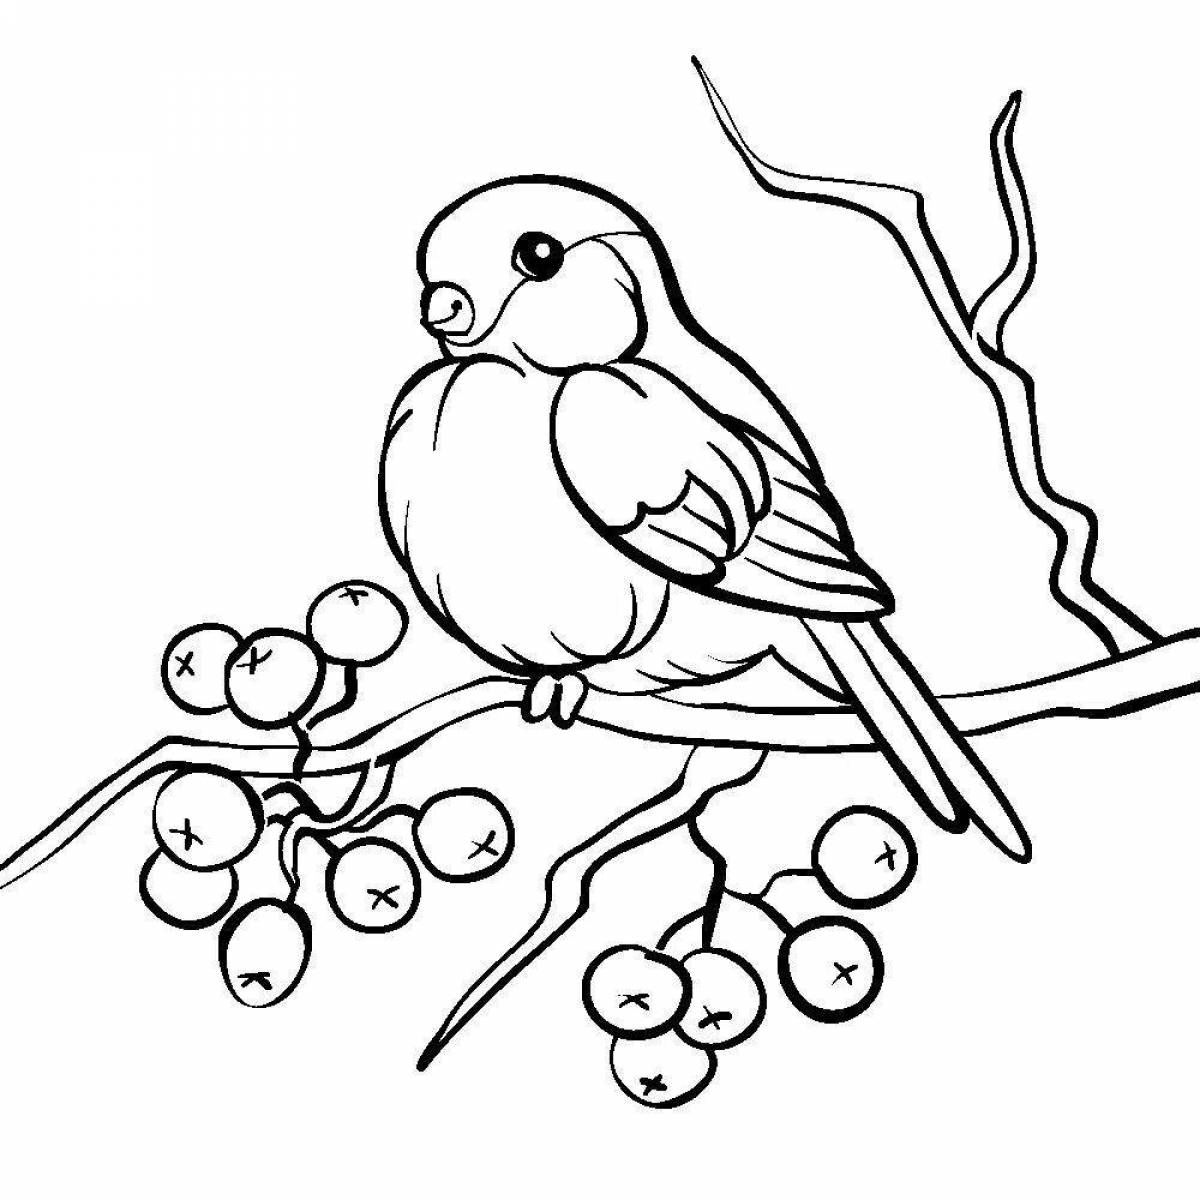 Cute bullfinch and tit coloring pages